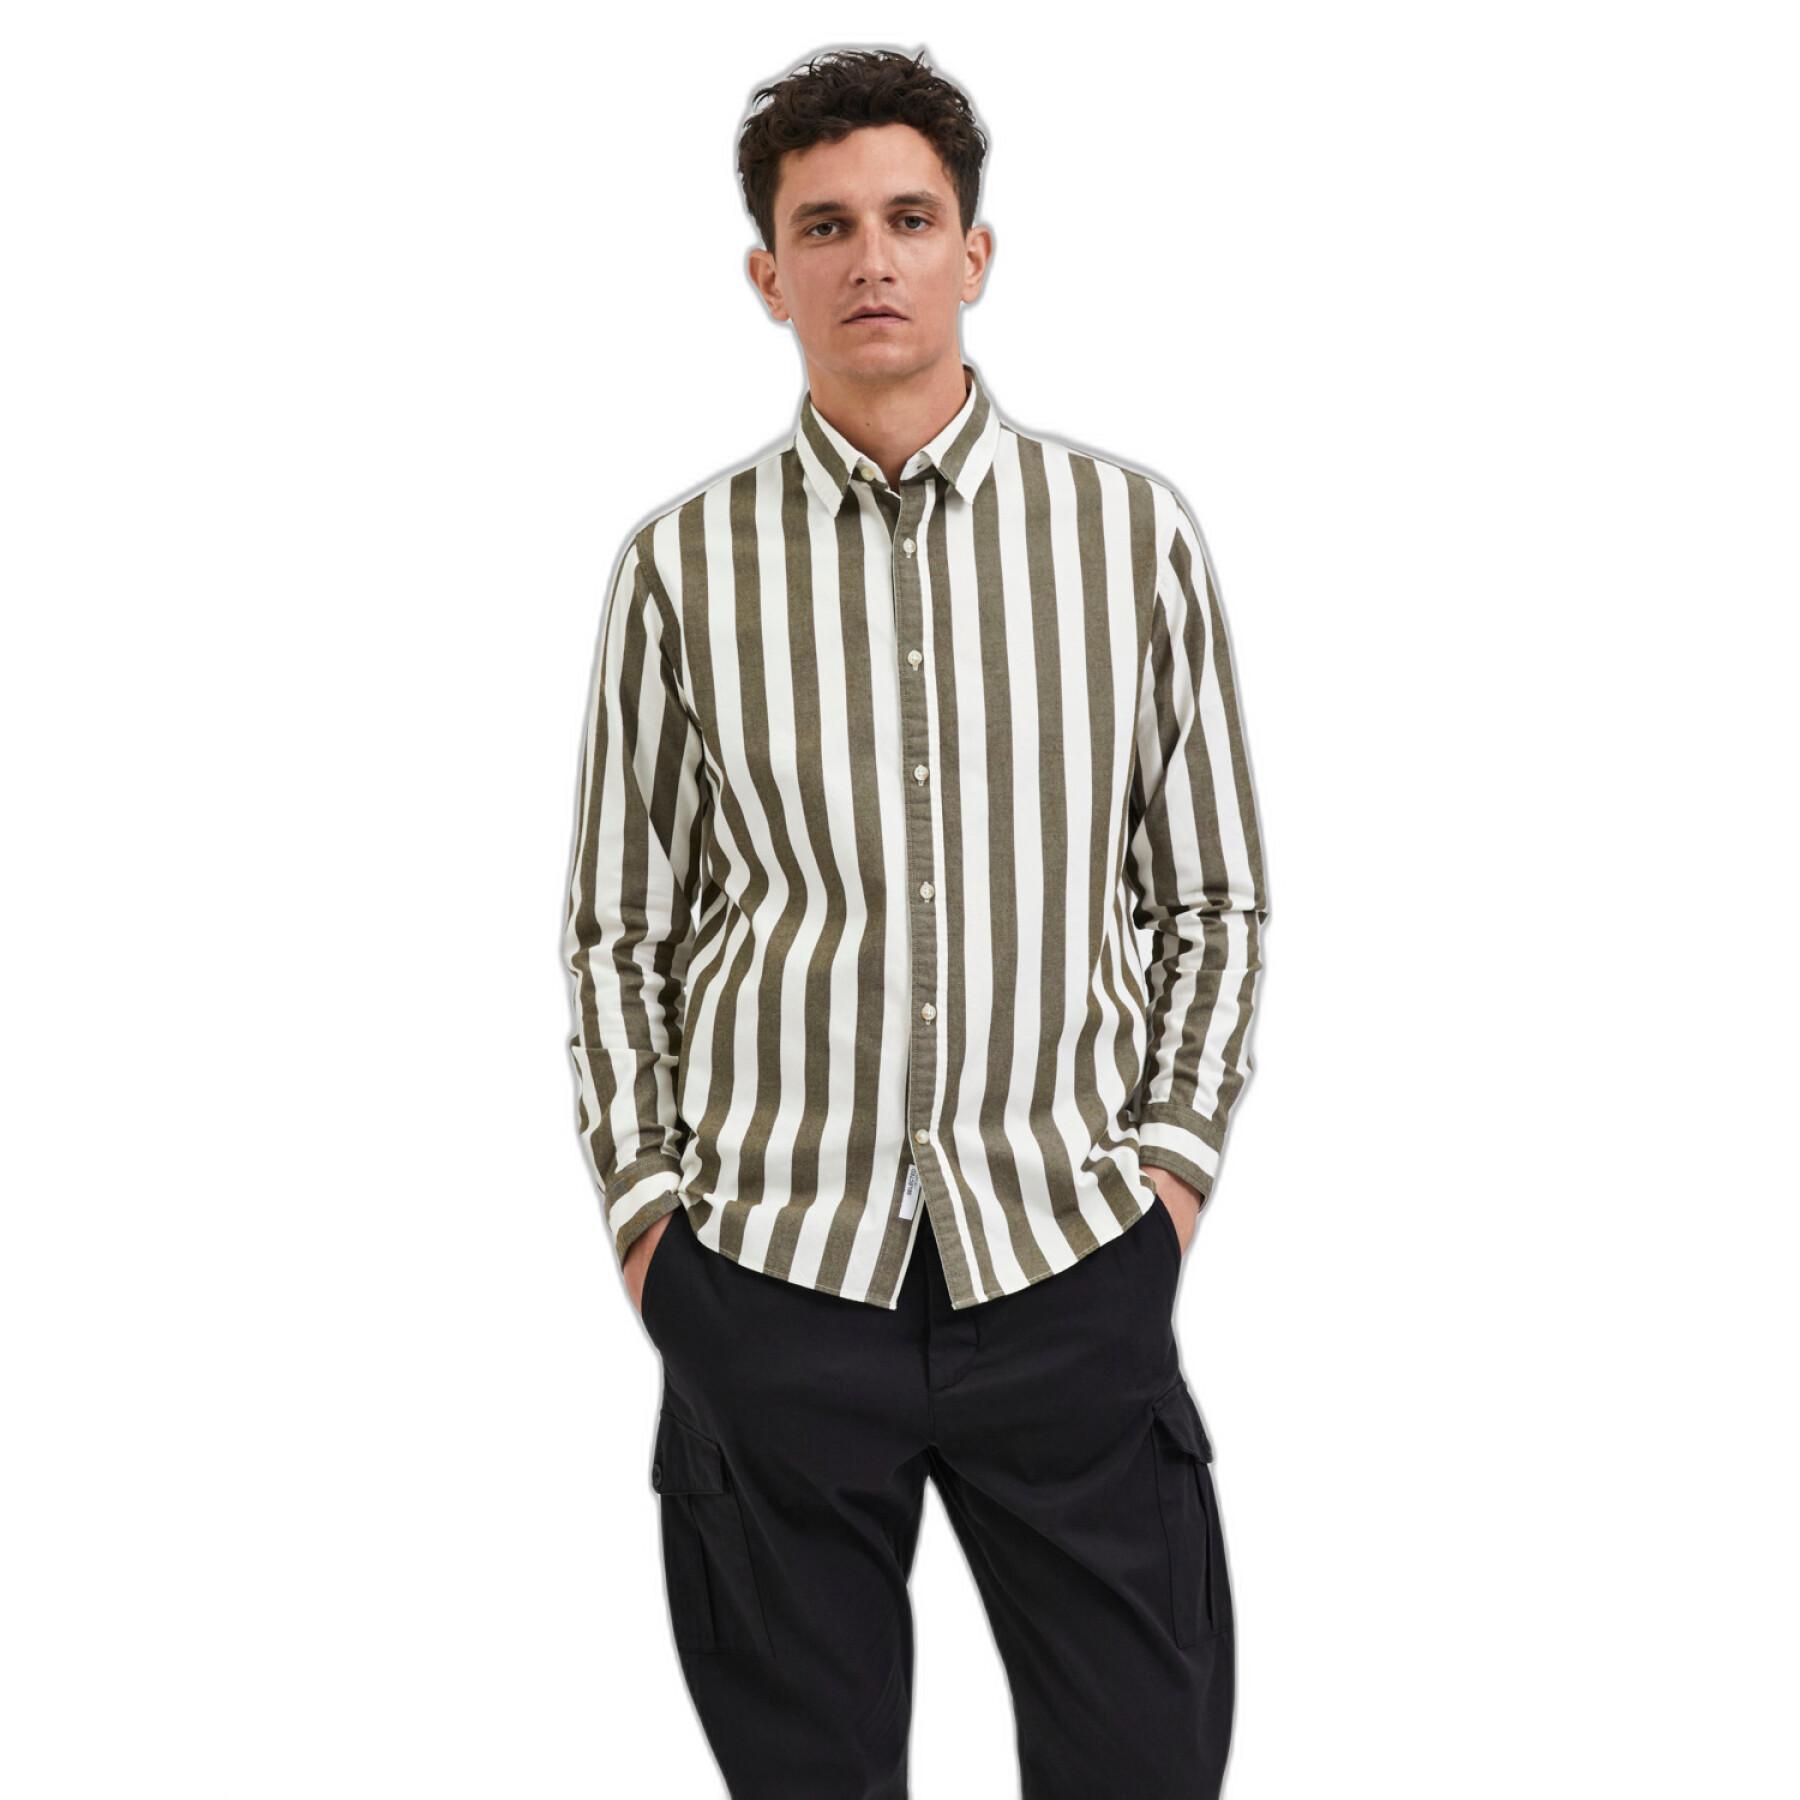 Shirt Selected Slhregpecko Stripes W